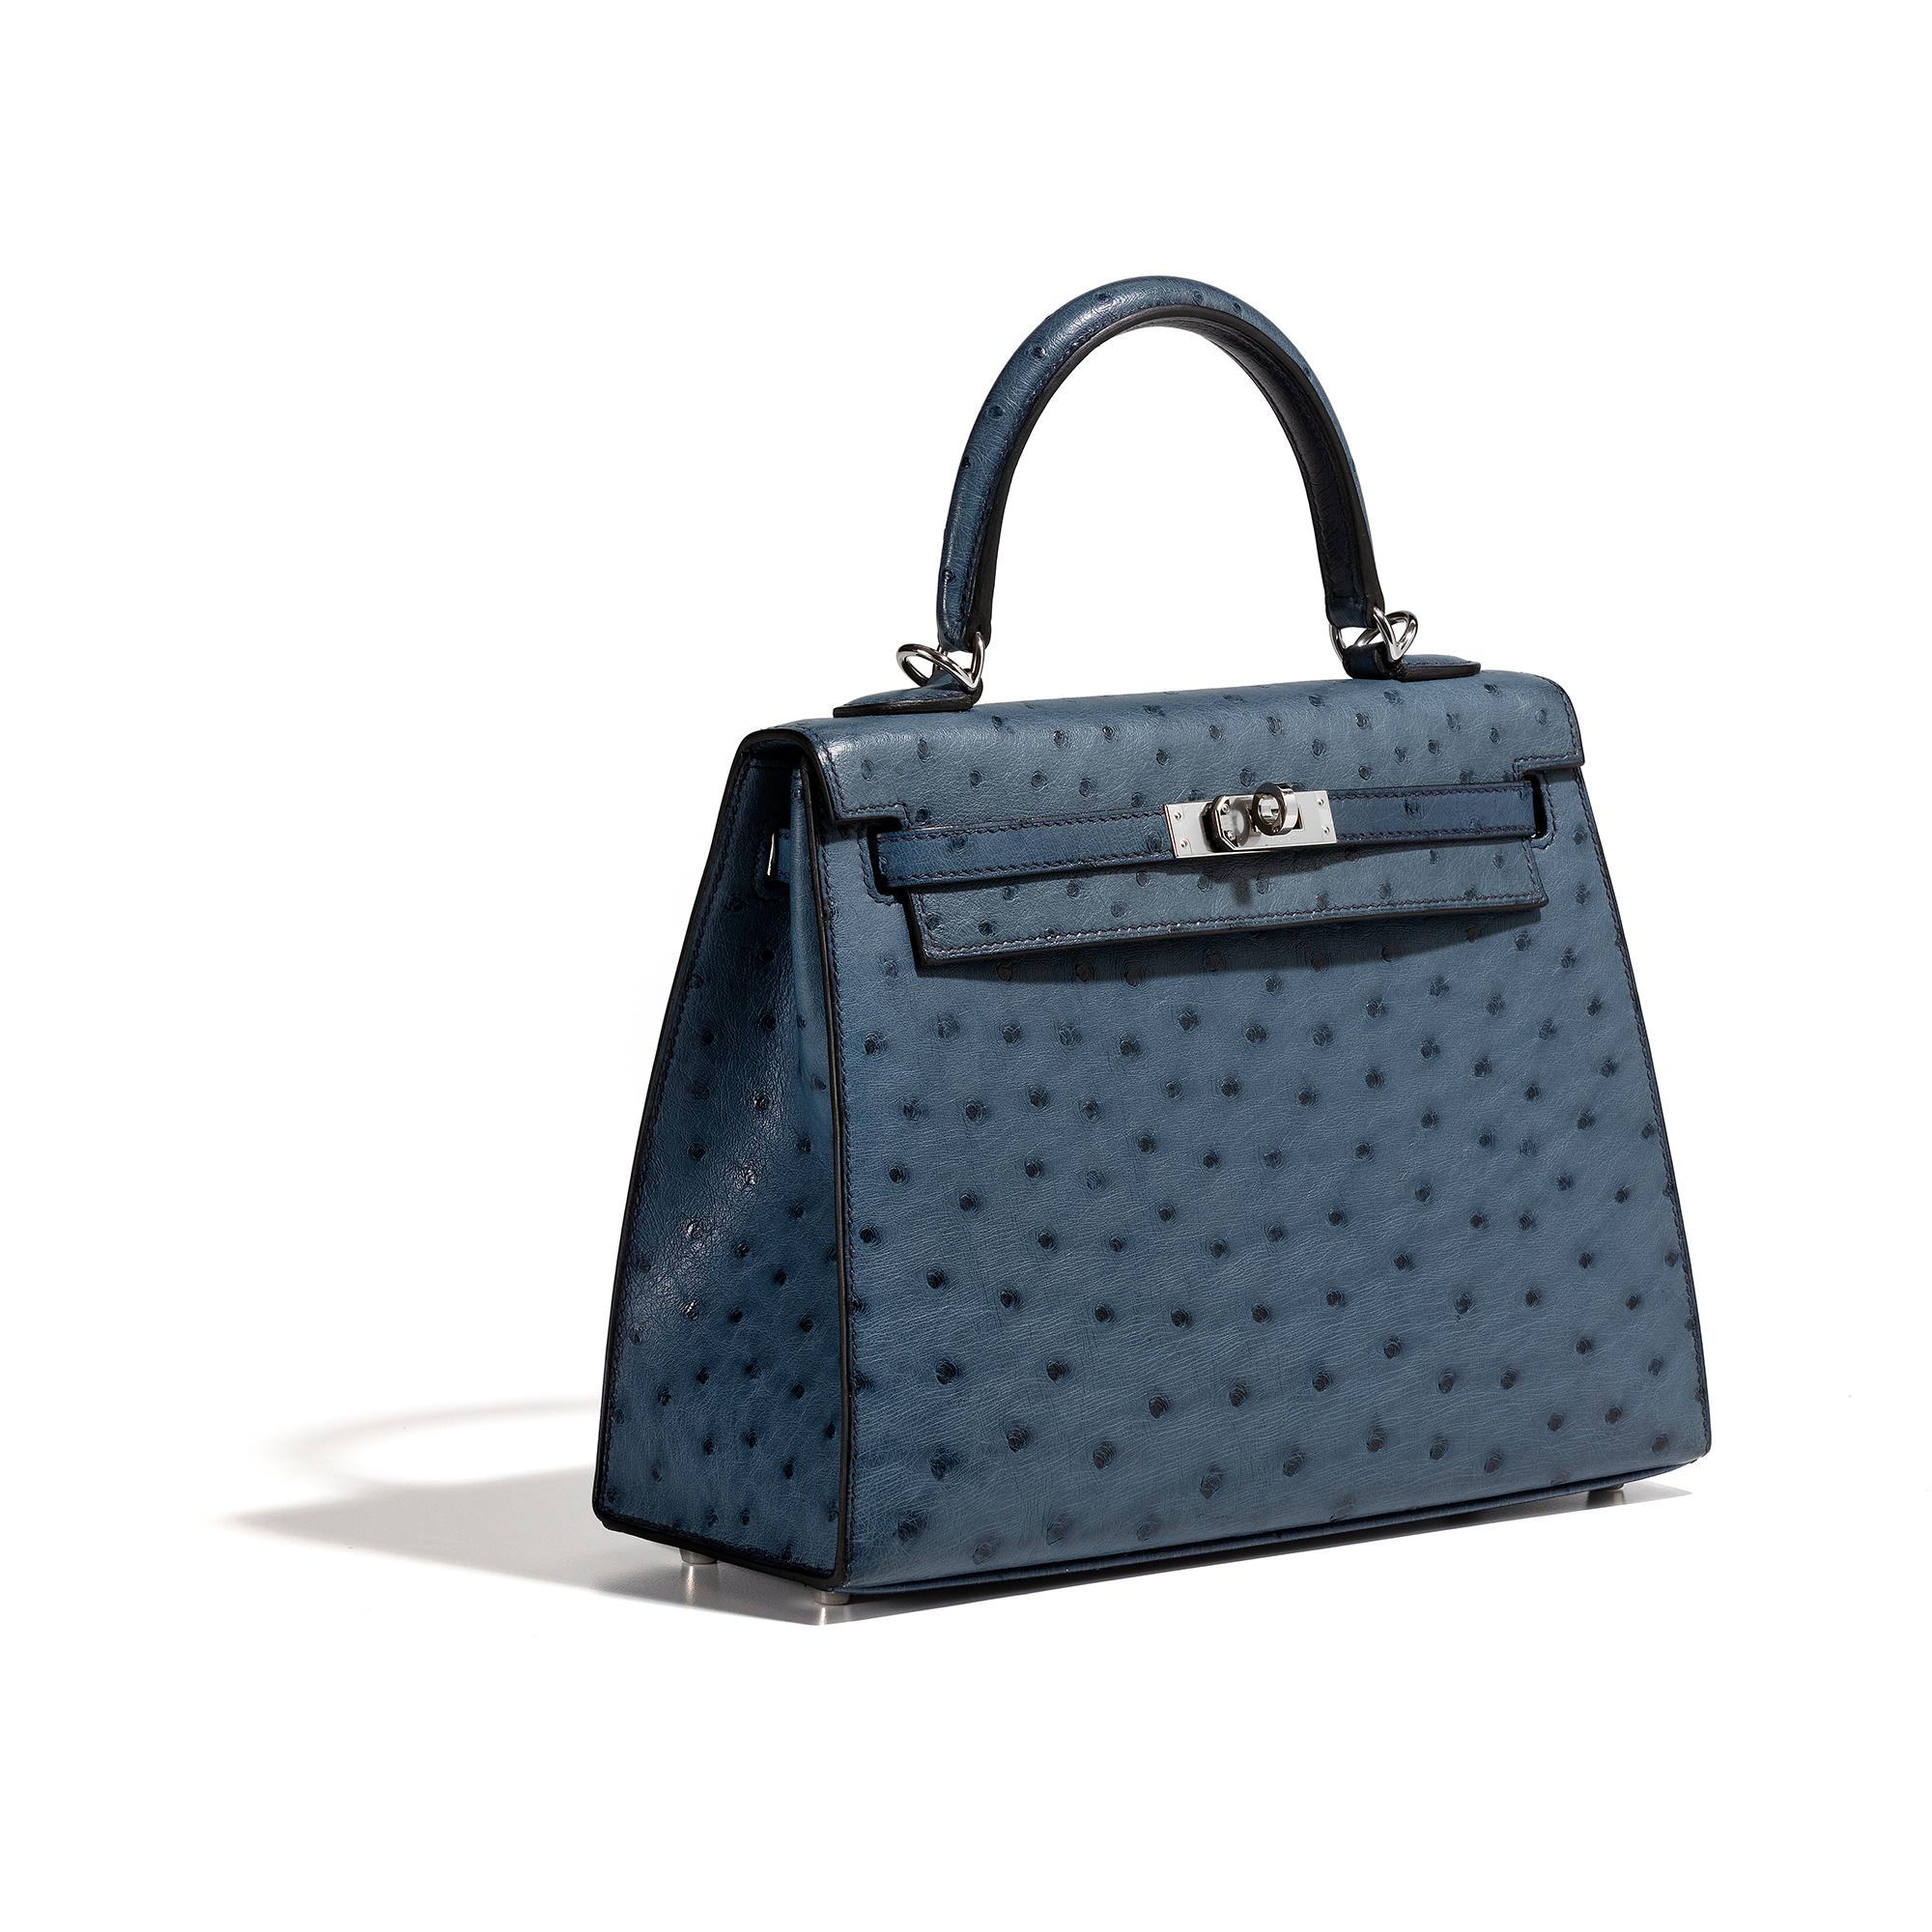 -Hermes Kelly 25cm Bleu Roi Ostrich PHW
-Exotic leather
-Palladium hardware
-Bleu Roi colour
-Sellier shape
-Crafted in 2020, with a 